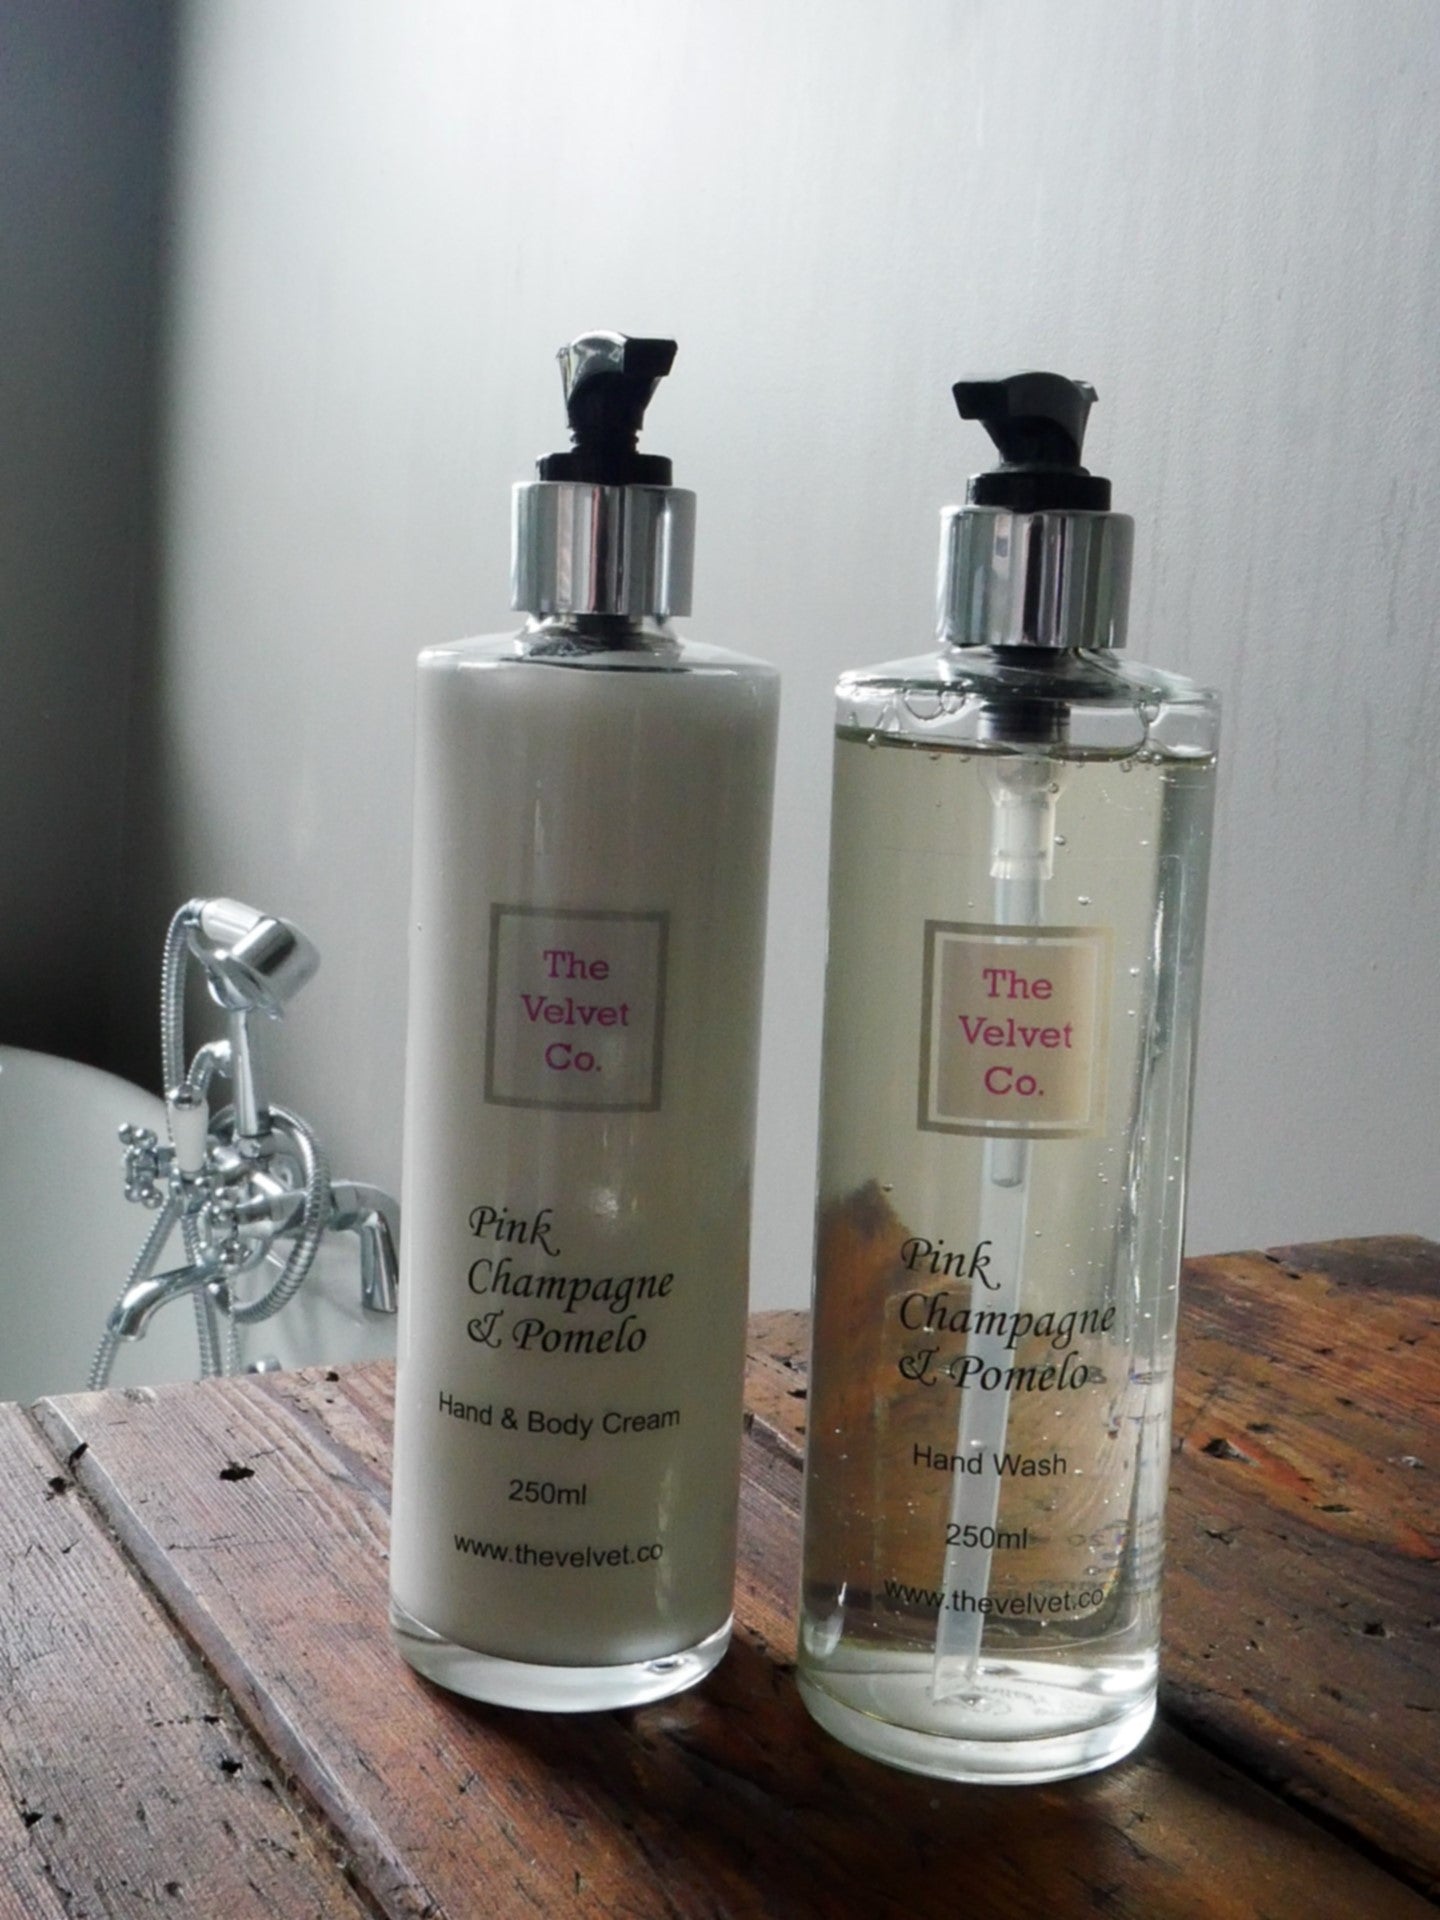 Pink Champagne & Pomelo Hand Wash and Hand/Body Cream Collection